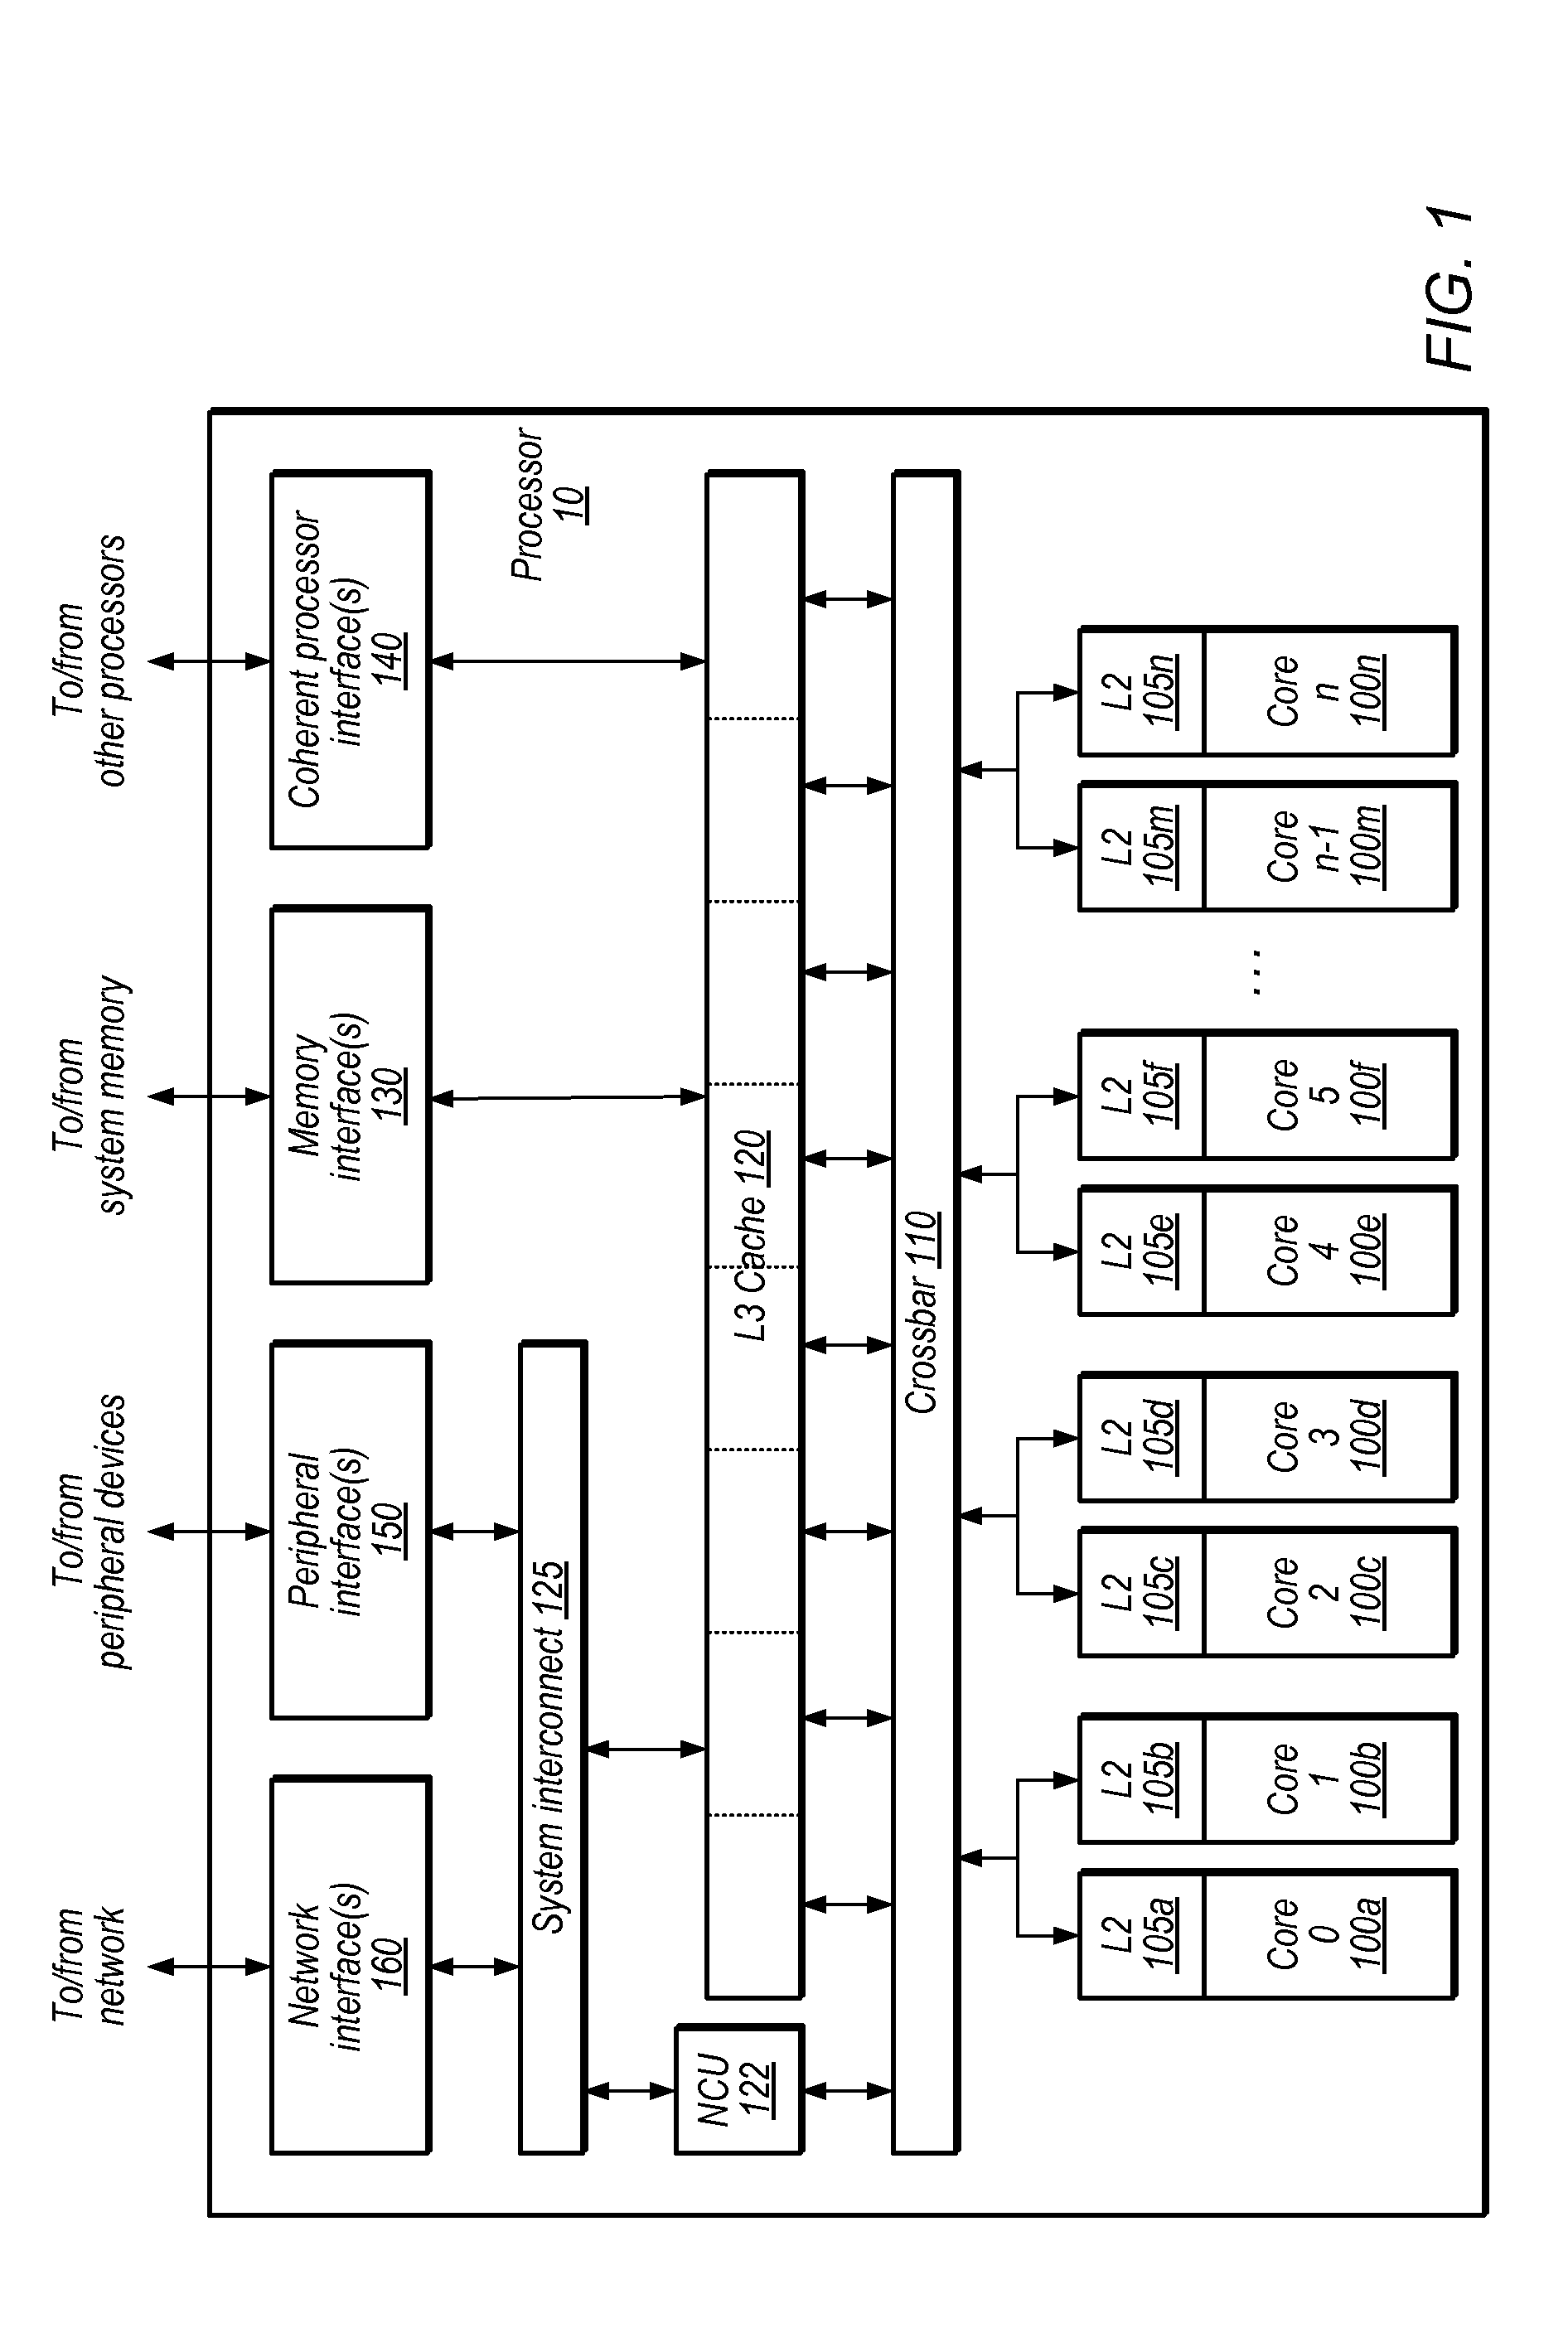 System and Method for Balancing Instruction Loads Between Multiple Execution Units Using Assignment History